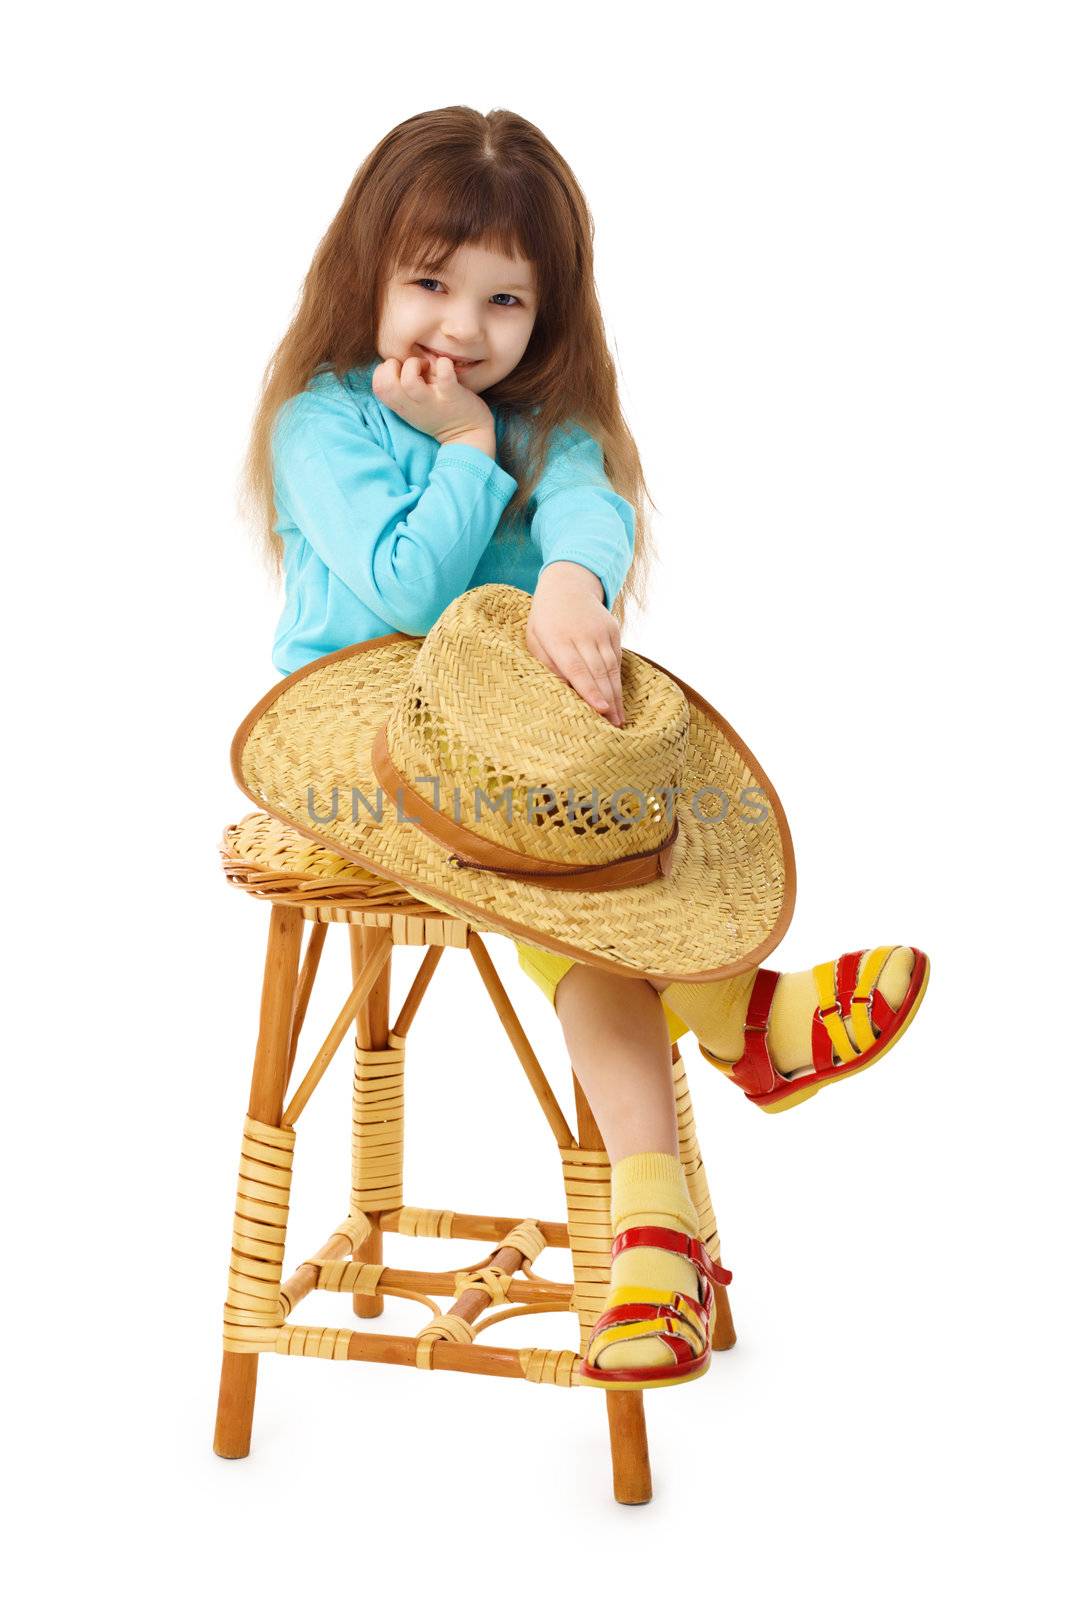 Child sits on an old wooden chair with hat by pzaxe